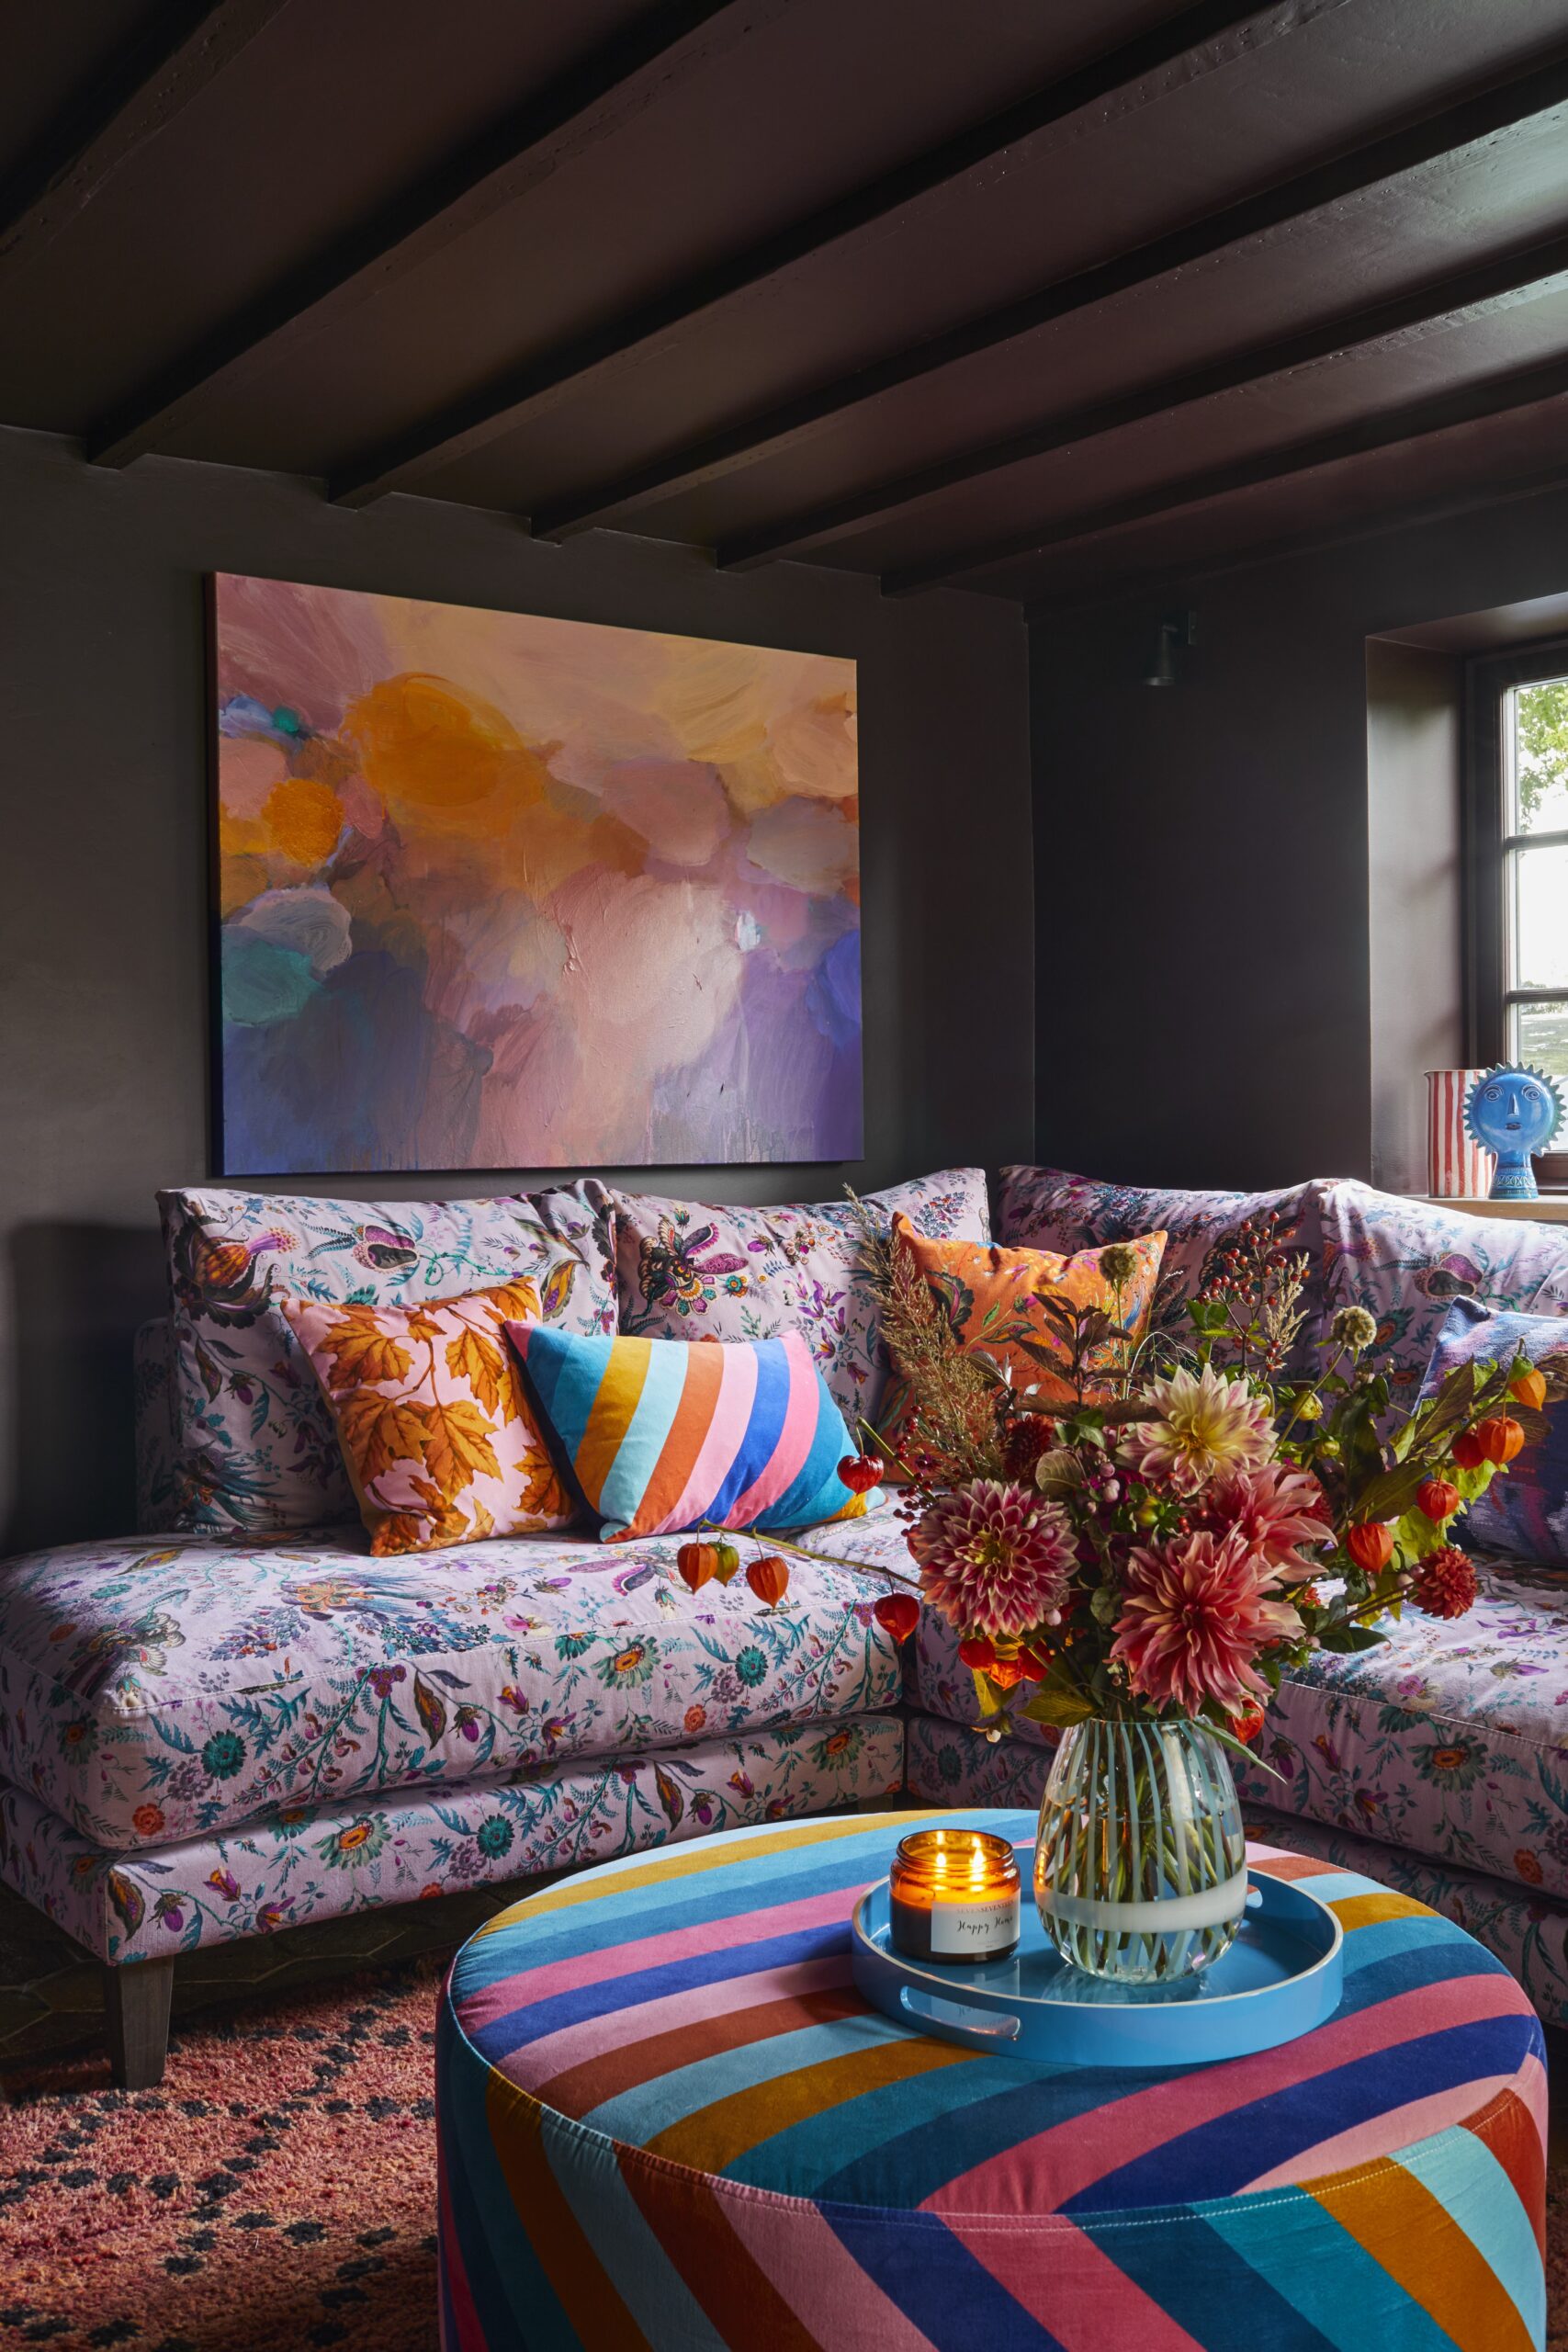 Corner of the snug with dark maroon on the walls and ceilings. Sofa in floral velvet fabric with colourful patterned scatted cushions. In front is an upholstered footstool with large floral display in a vase. 